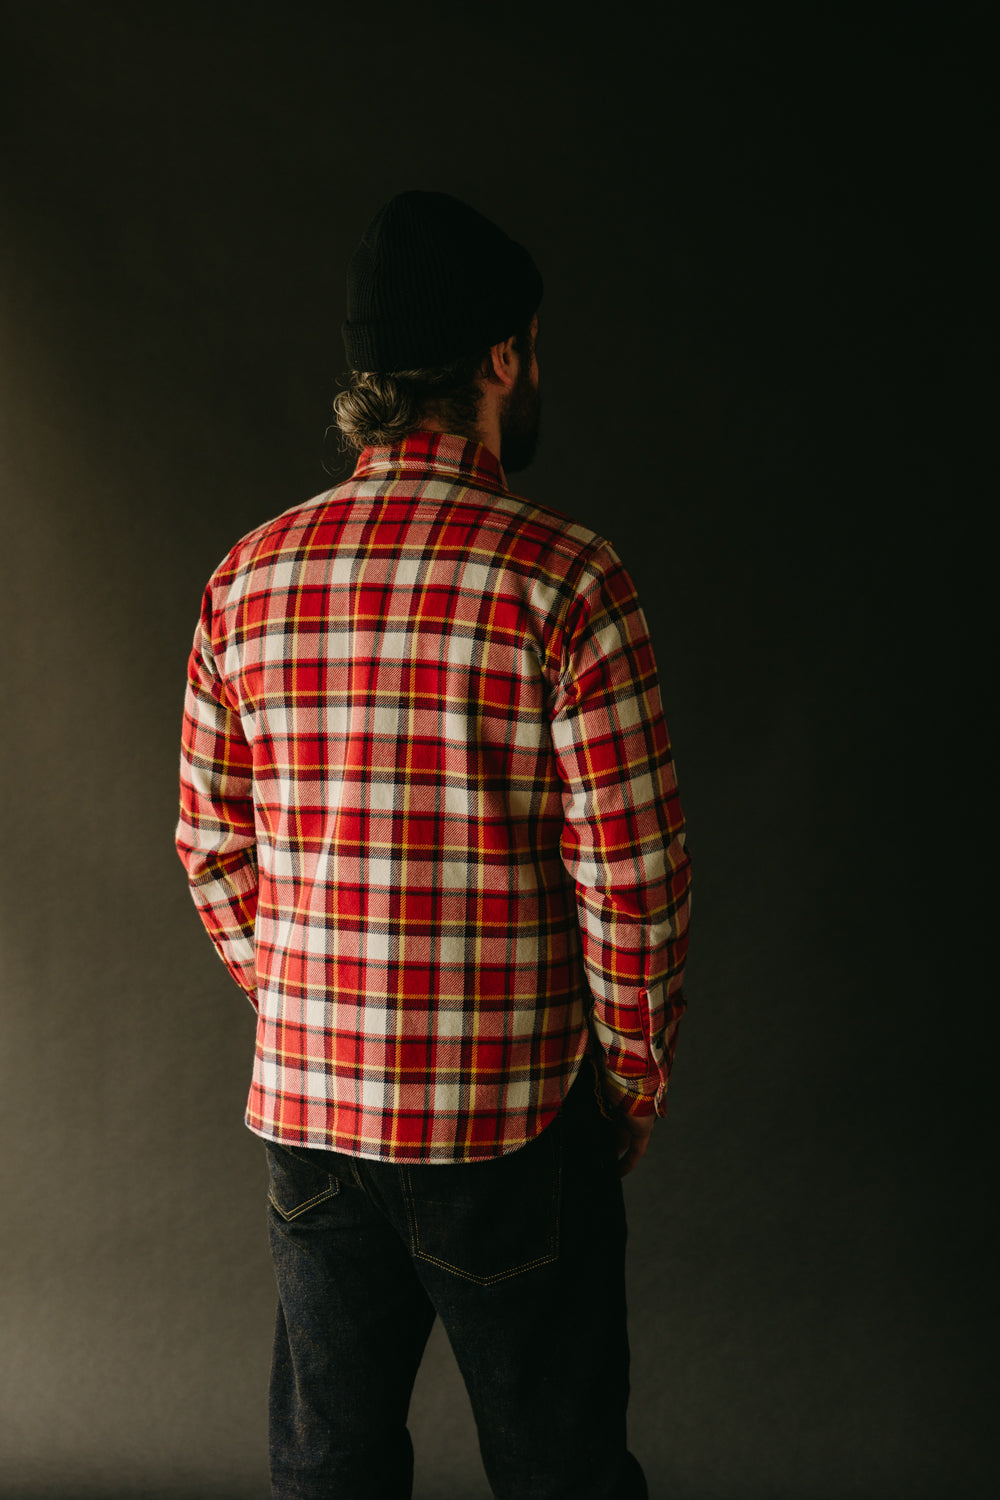 IHSH-334-RED - Ultra Heavy Flannel Classic Check Work Shirt - Red